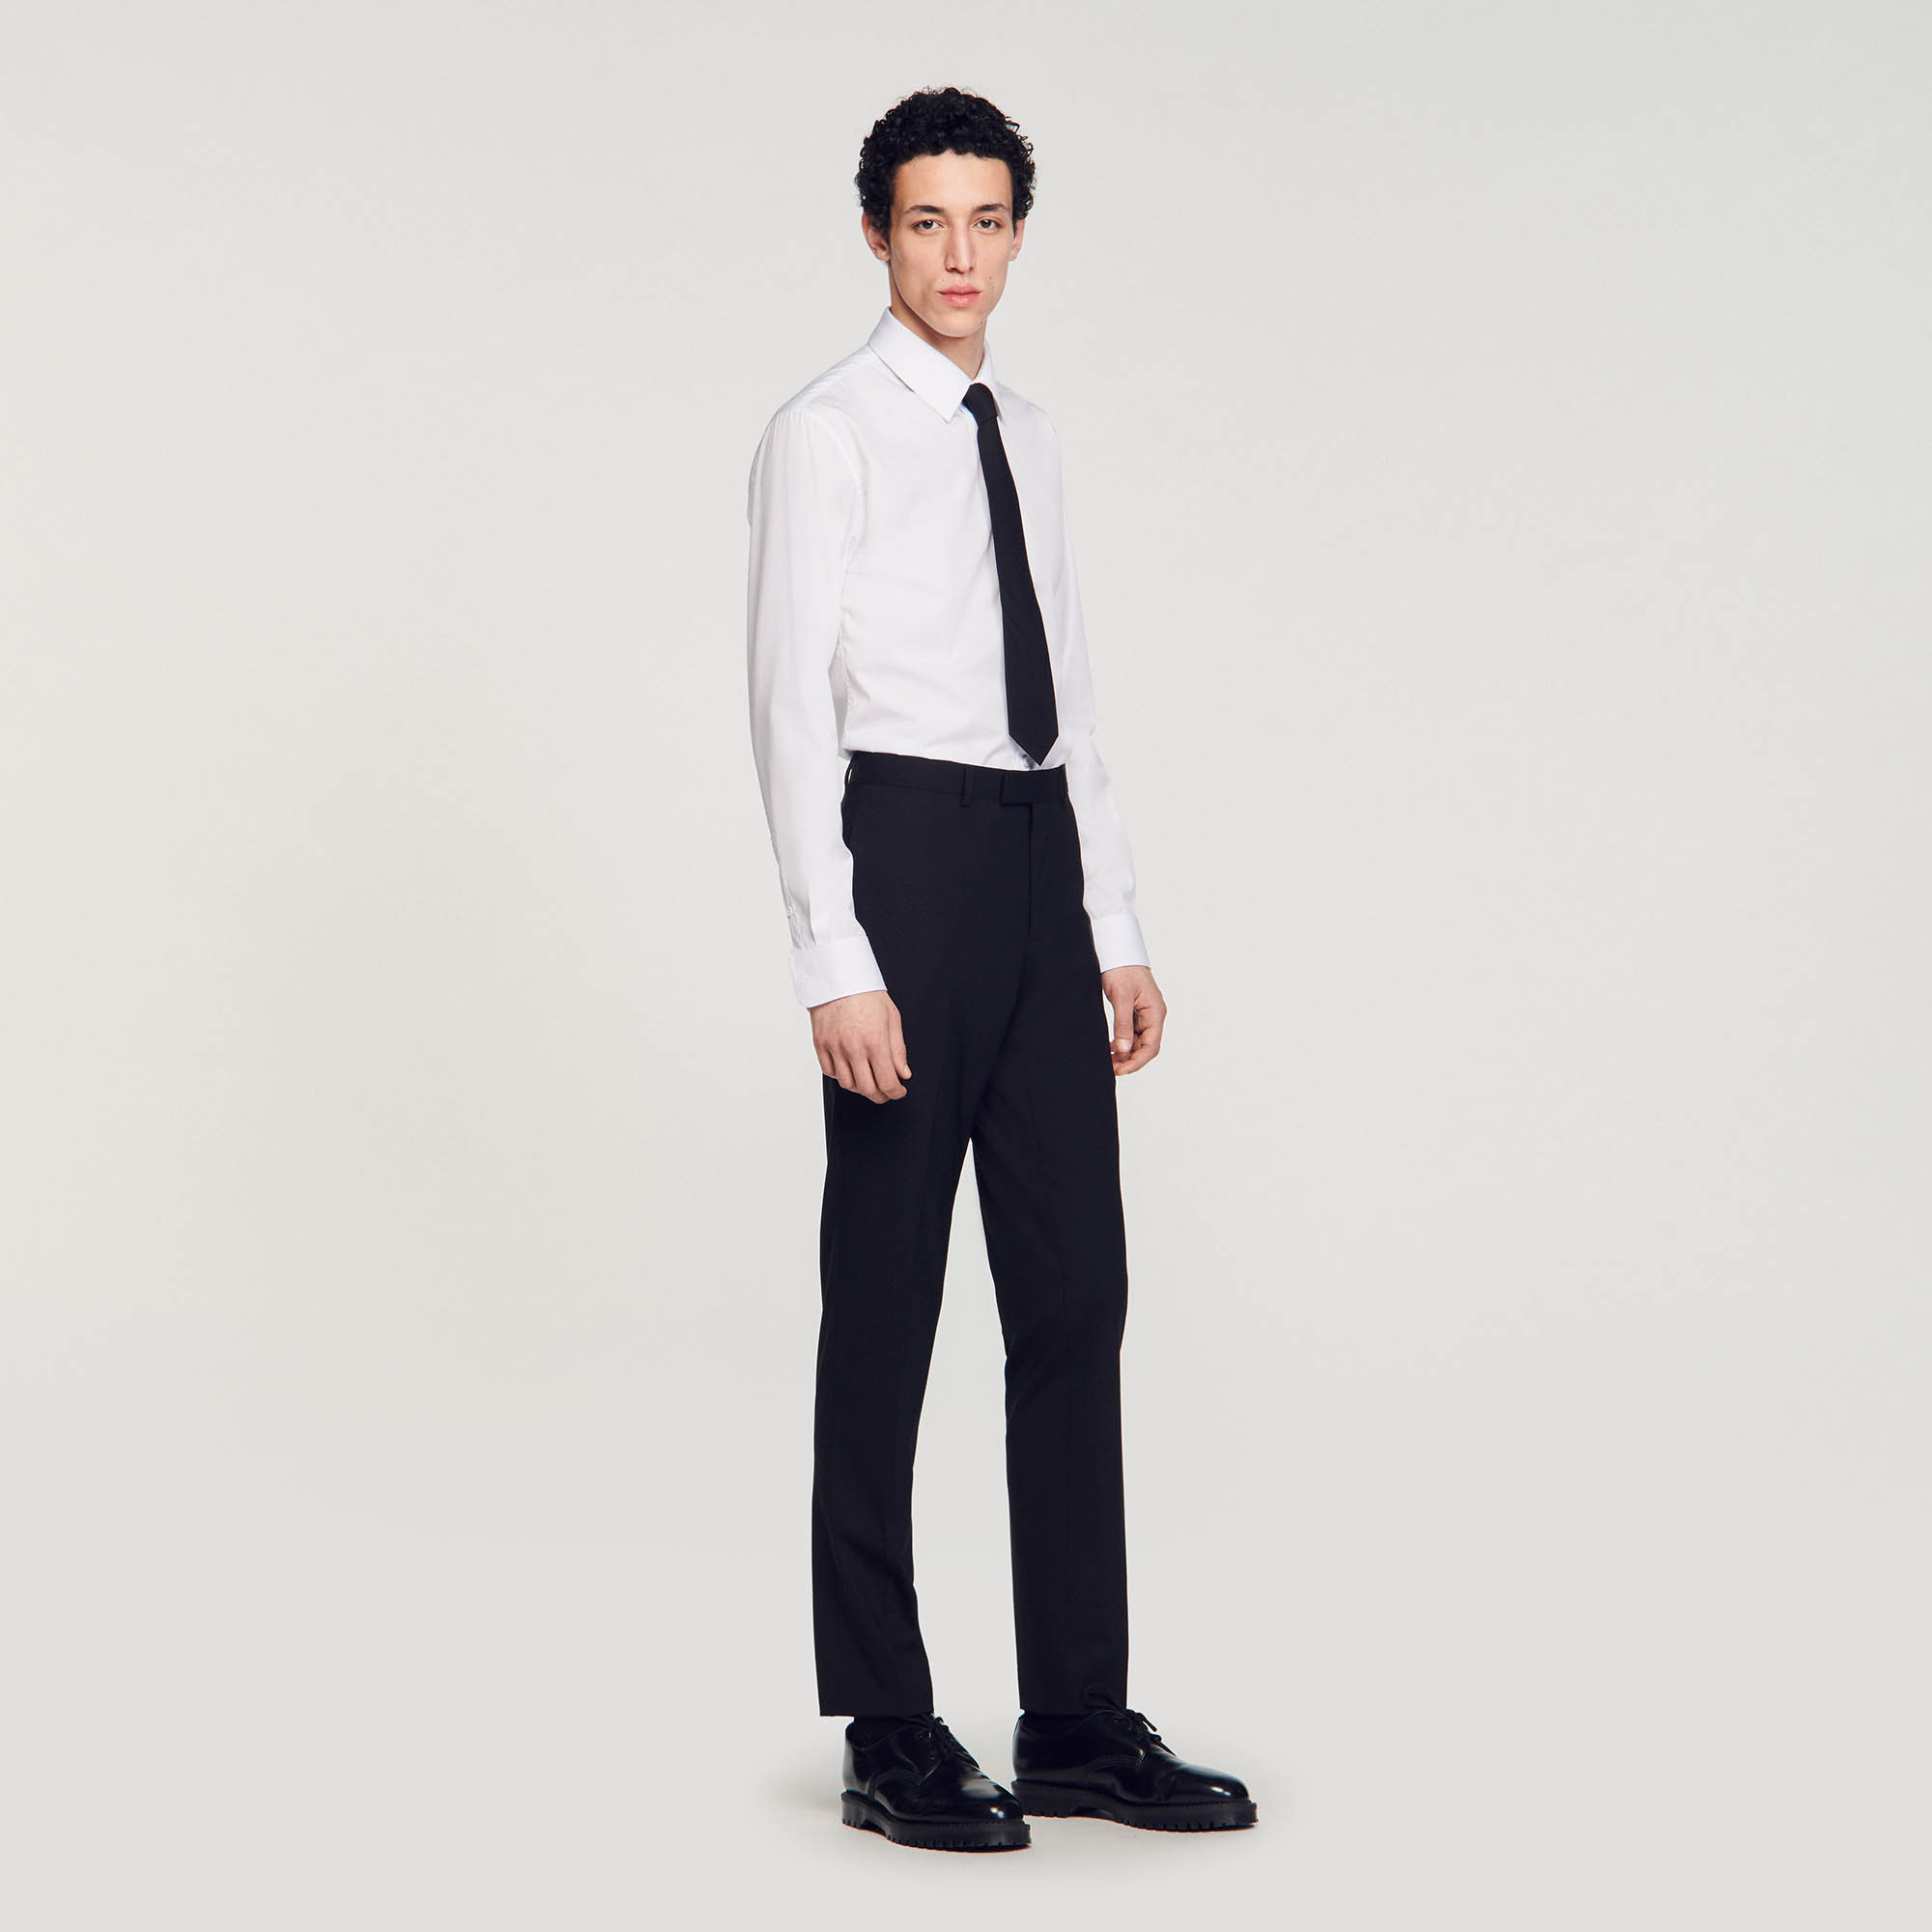 Sandro virgin wool Wool suit pants with a classic cut and pockets